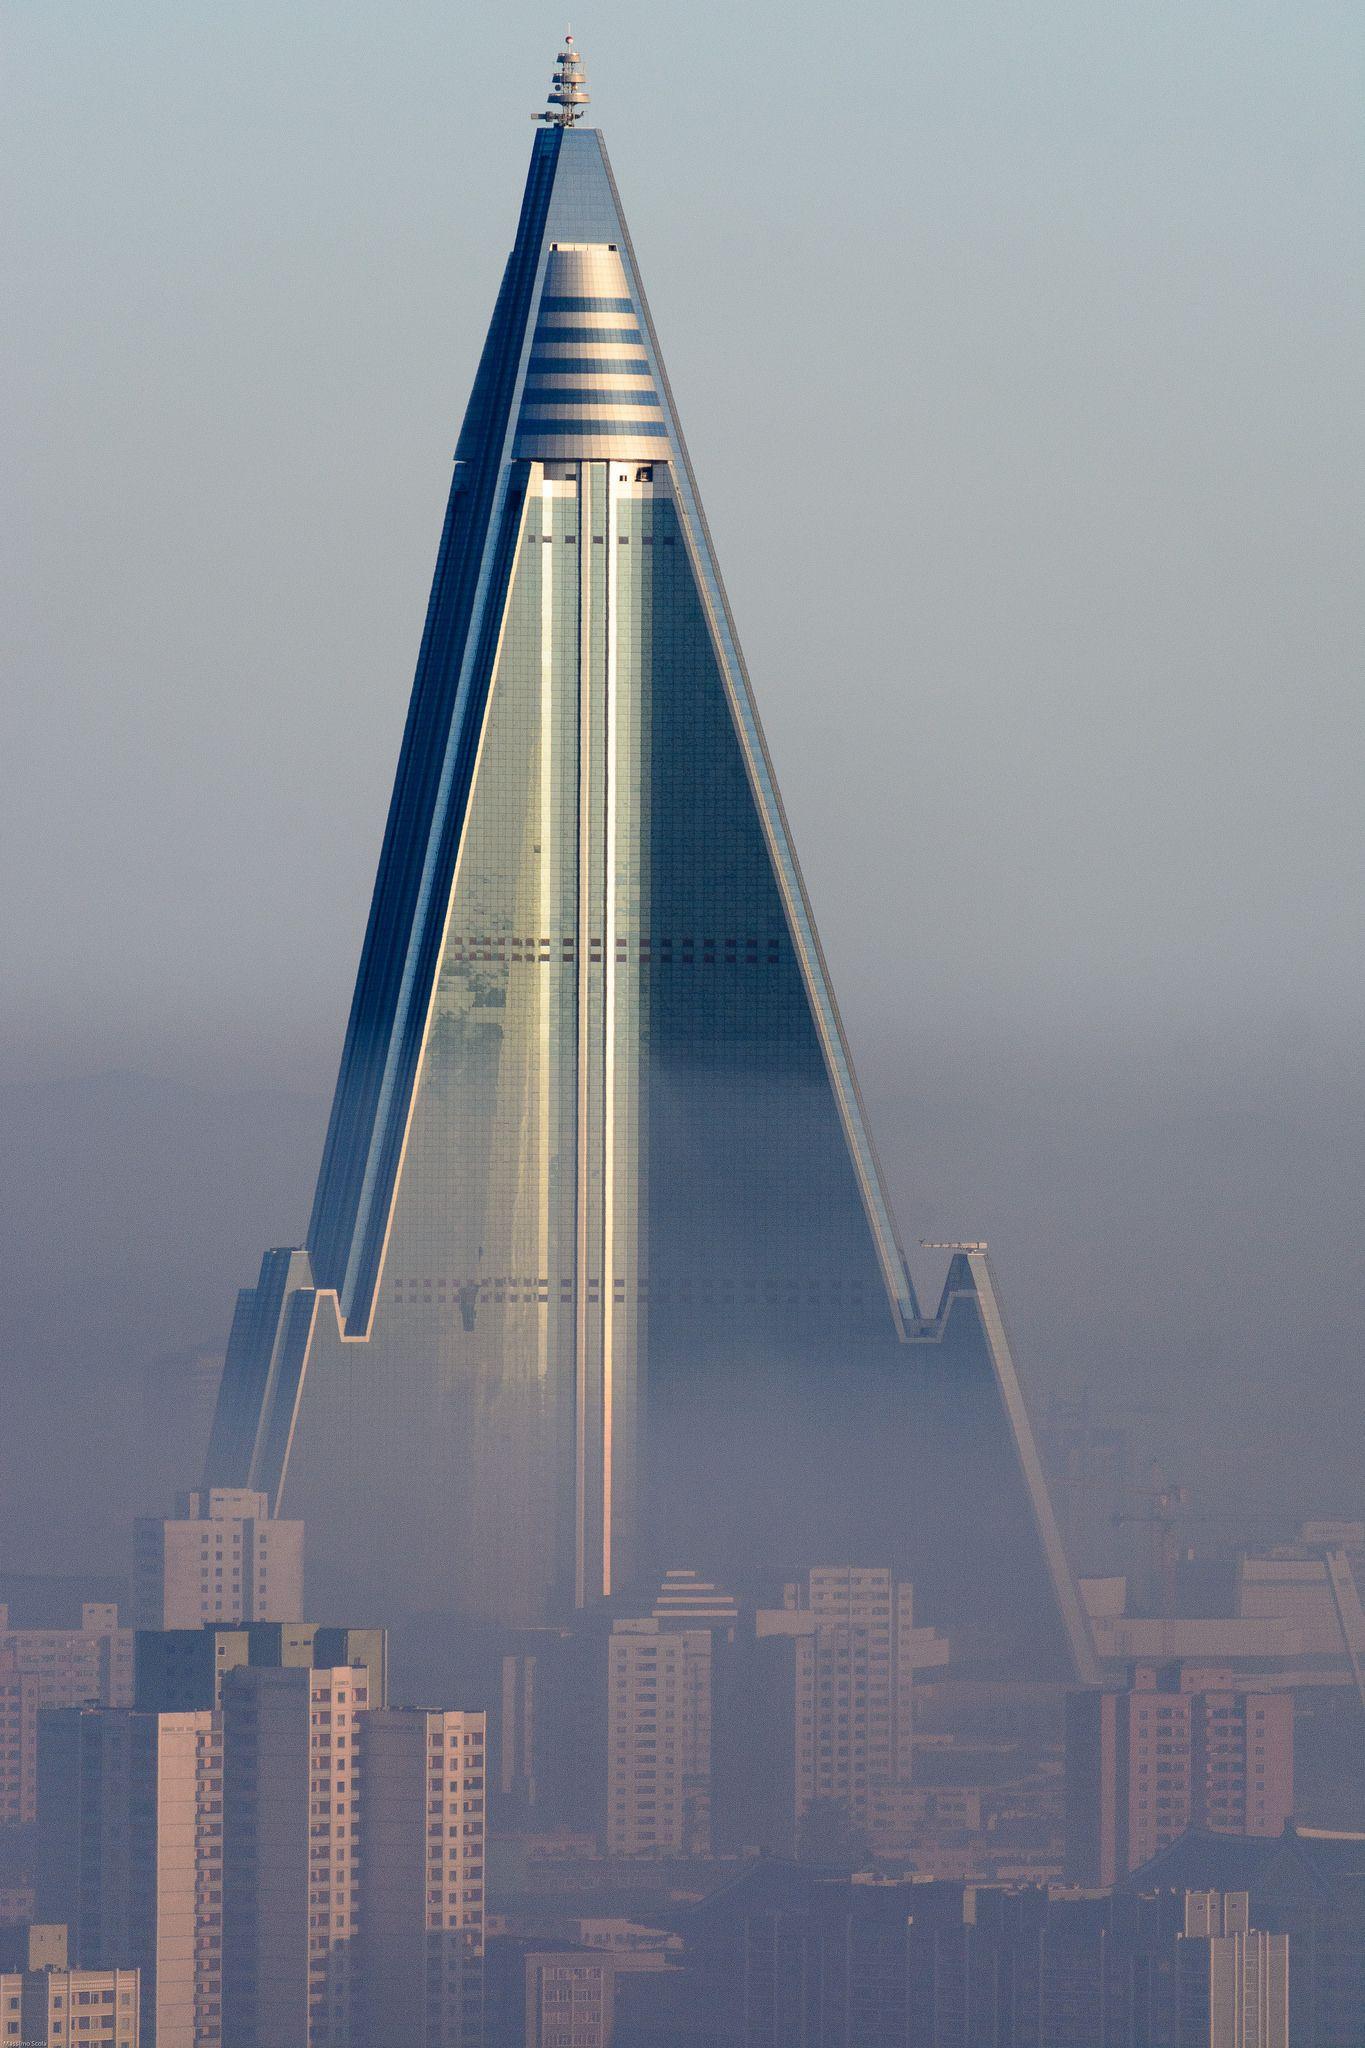 The Never Opened Ryugyong Hotel In Pyongyang, North Korea